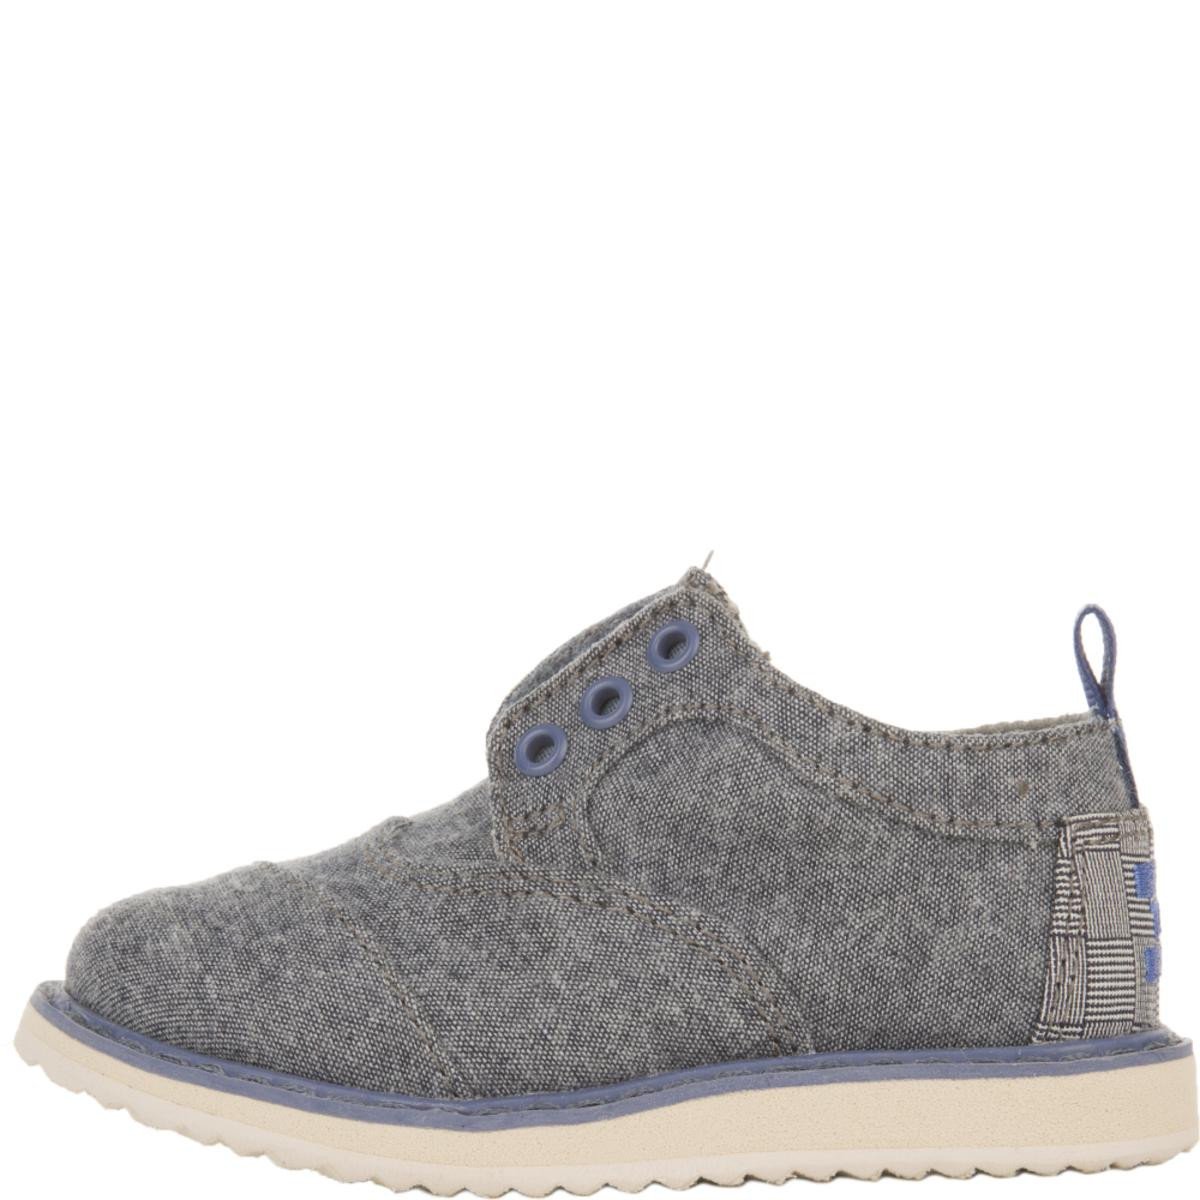 Tiny Toms: Brogues Blue Chambray Sneakers